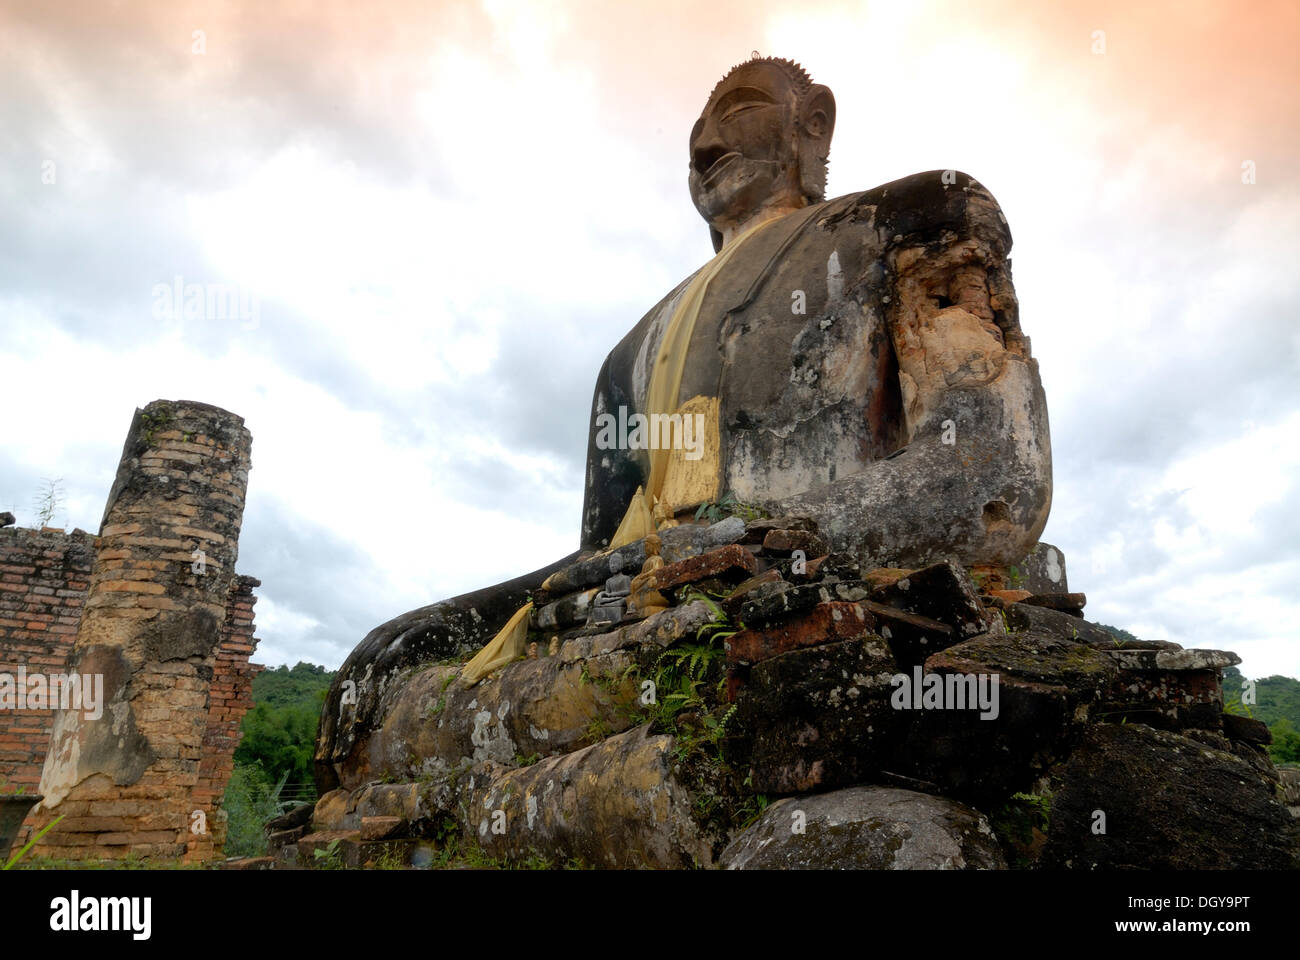 Soot covered Buddha statue of the Buddhist temple of Wat Phia Wat which was bombed in 1966 during the Vietnam War, Muang Khun Stock Photo